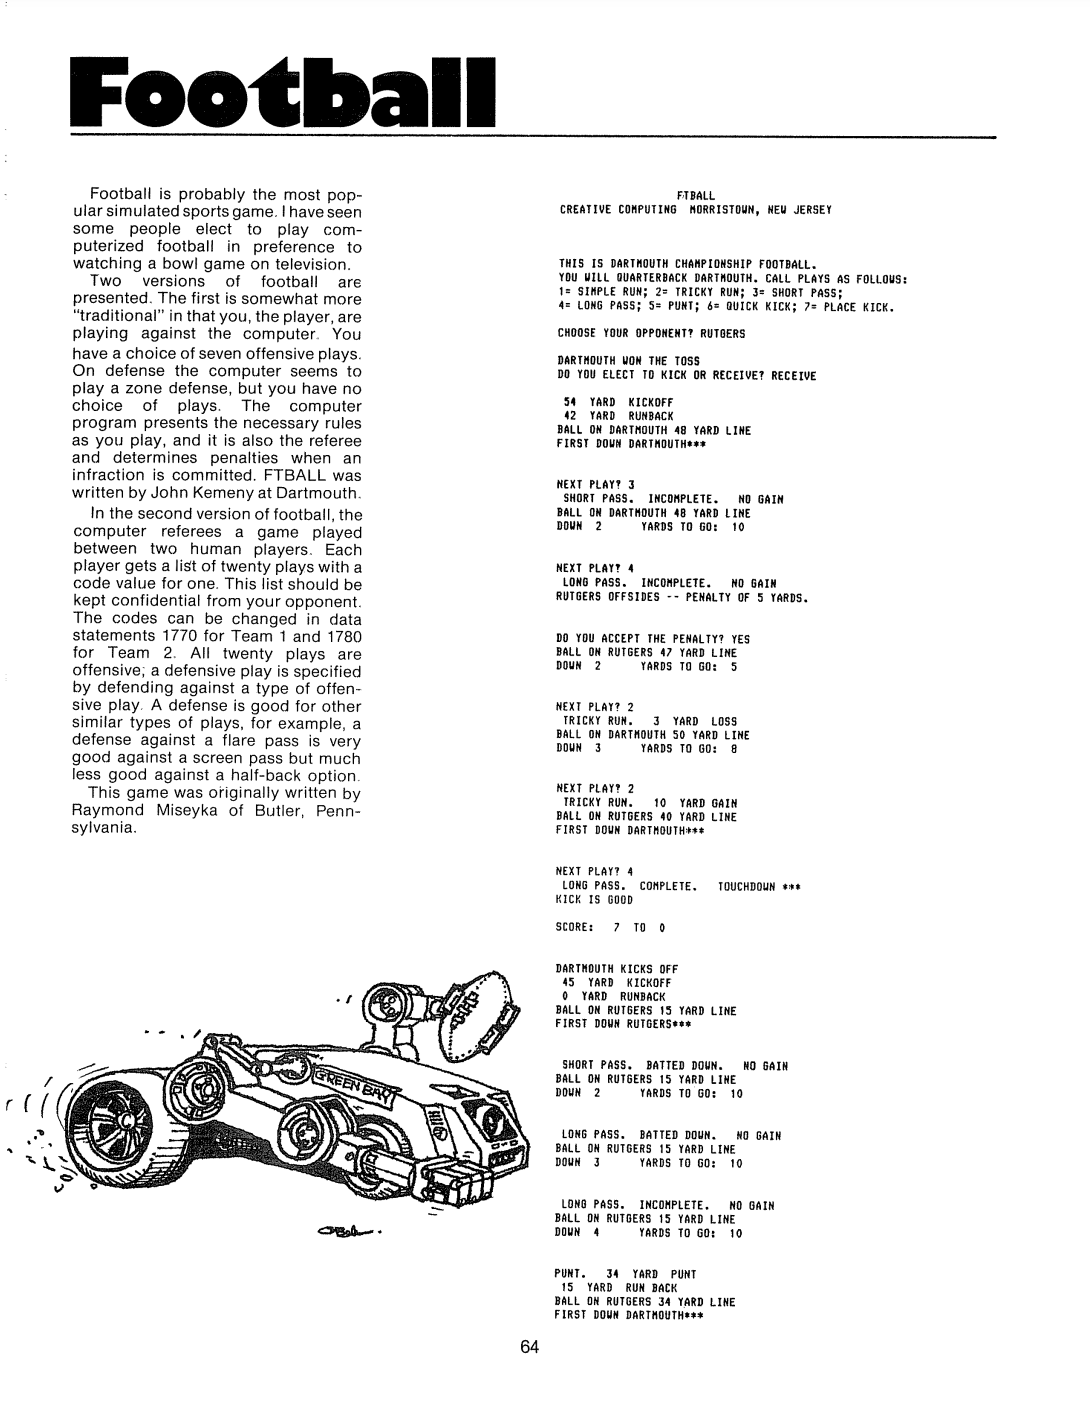 A monochrome scanned page of a book offering a brief summary of how to play the 1978 version of FTBALL in the left column of text and a sample play-through in the right column. Below both columns is a line drawing cartoon of a wheeled-robot holding a football with the words Green Bay printed on its side.